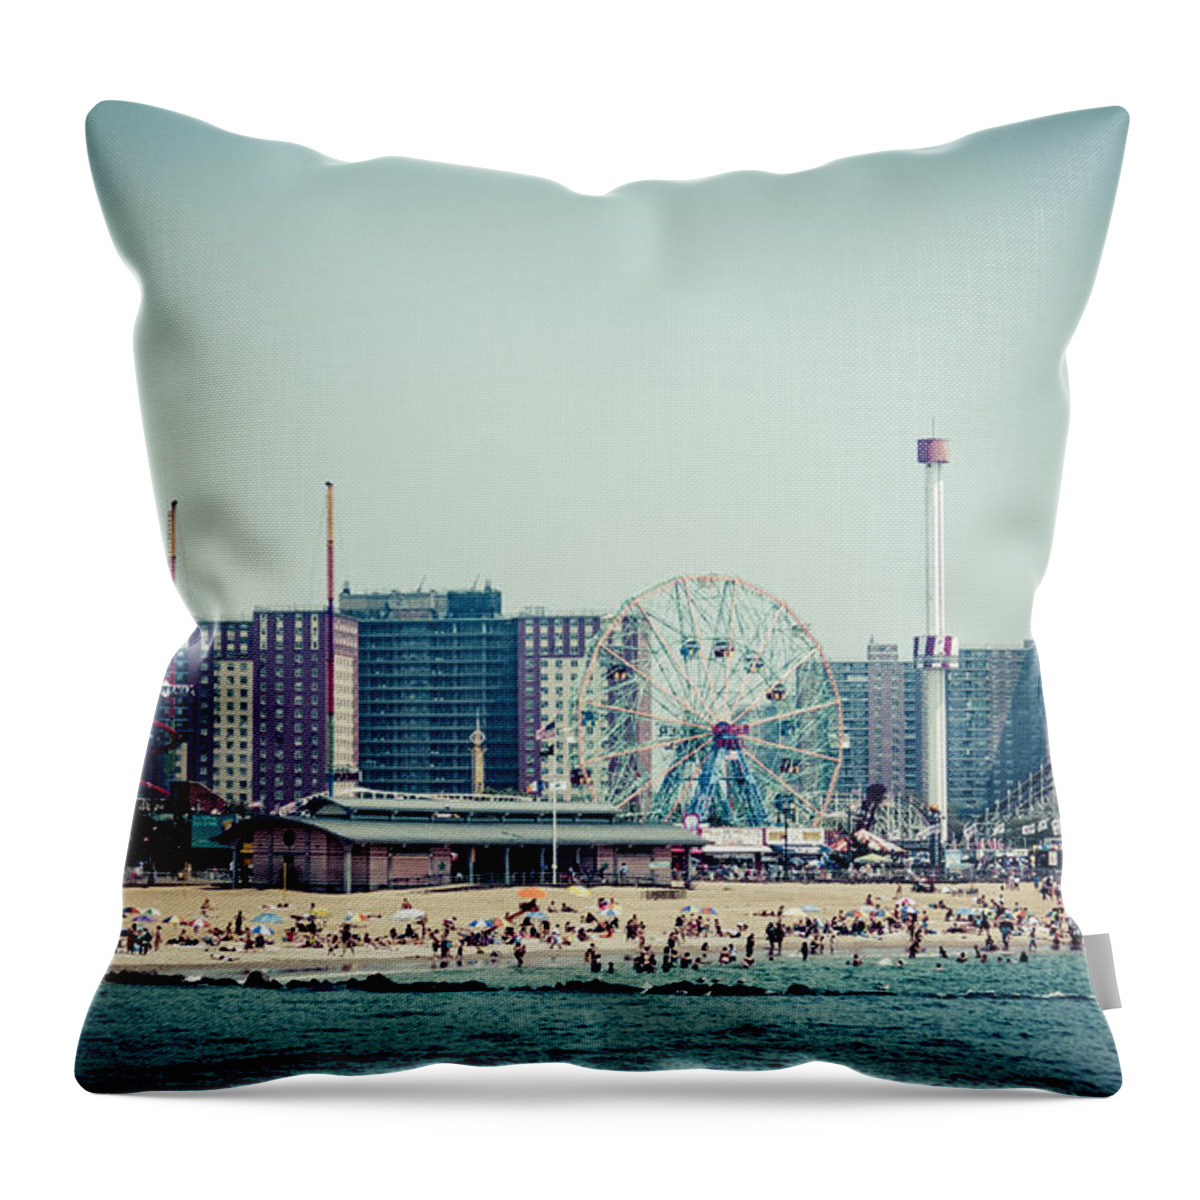 Coney Island Throw Pillow featuring the photograph Coney Island Dream by Frank Winters